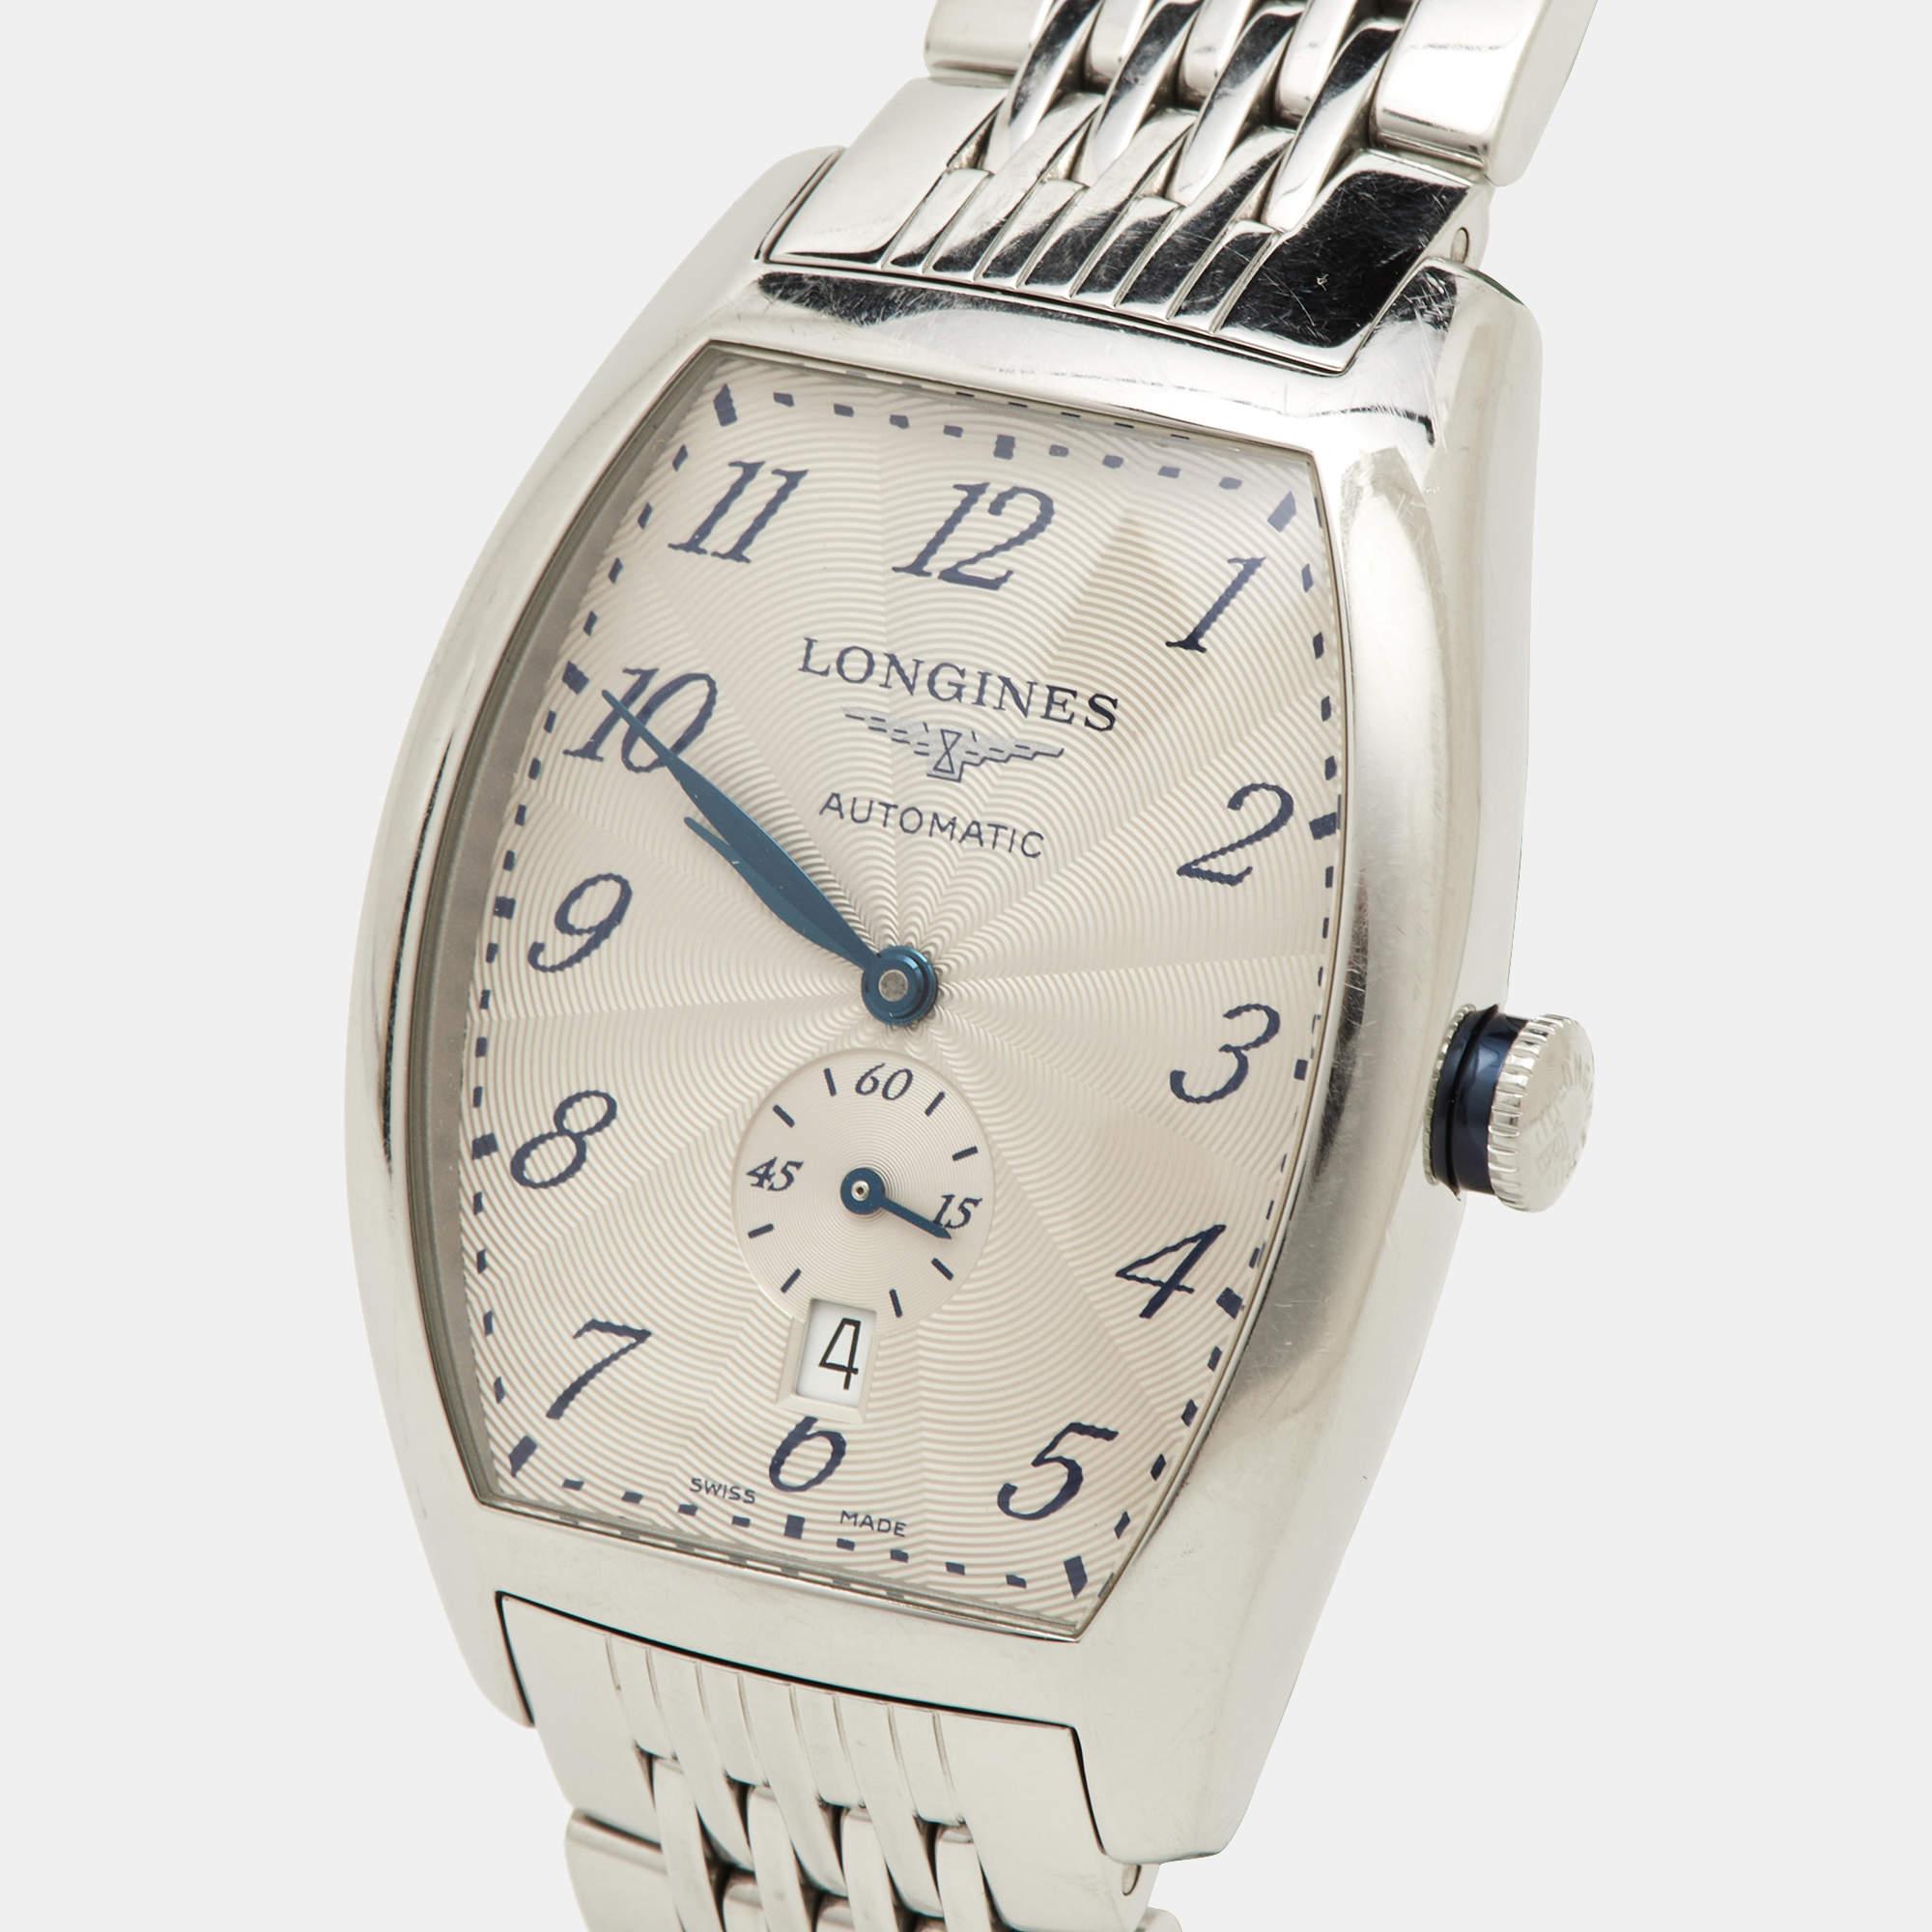 A meticulously crafted watch holds the promise of enduring appeal, all-day comfort, and investment value. Carefully assembled and finished to stand out on your wrist, this Longines timepiece for women is a purchase you will cherish.

